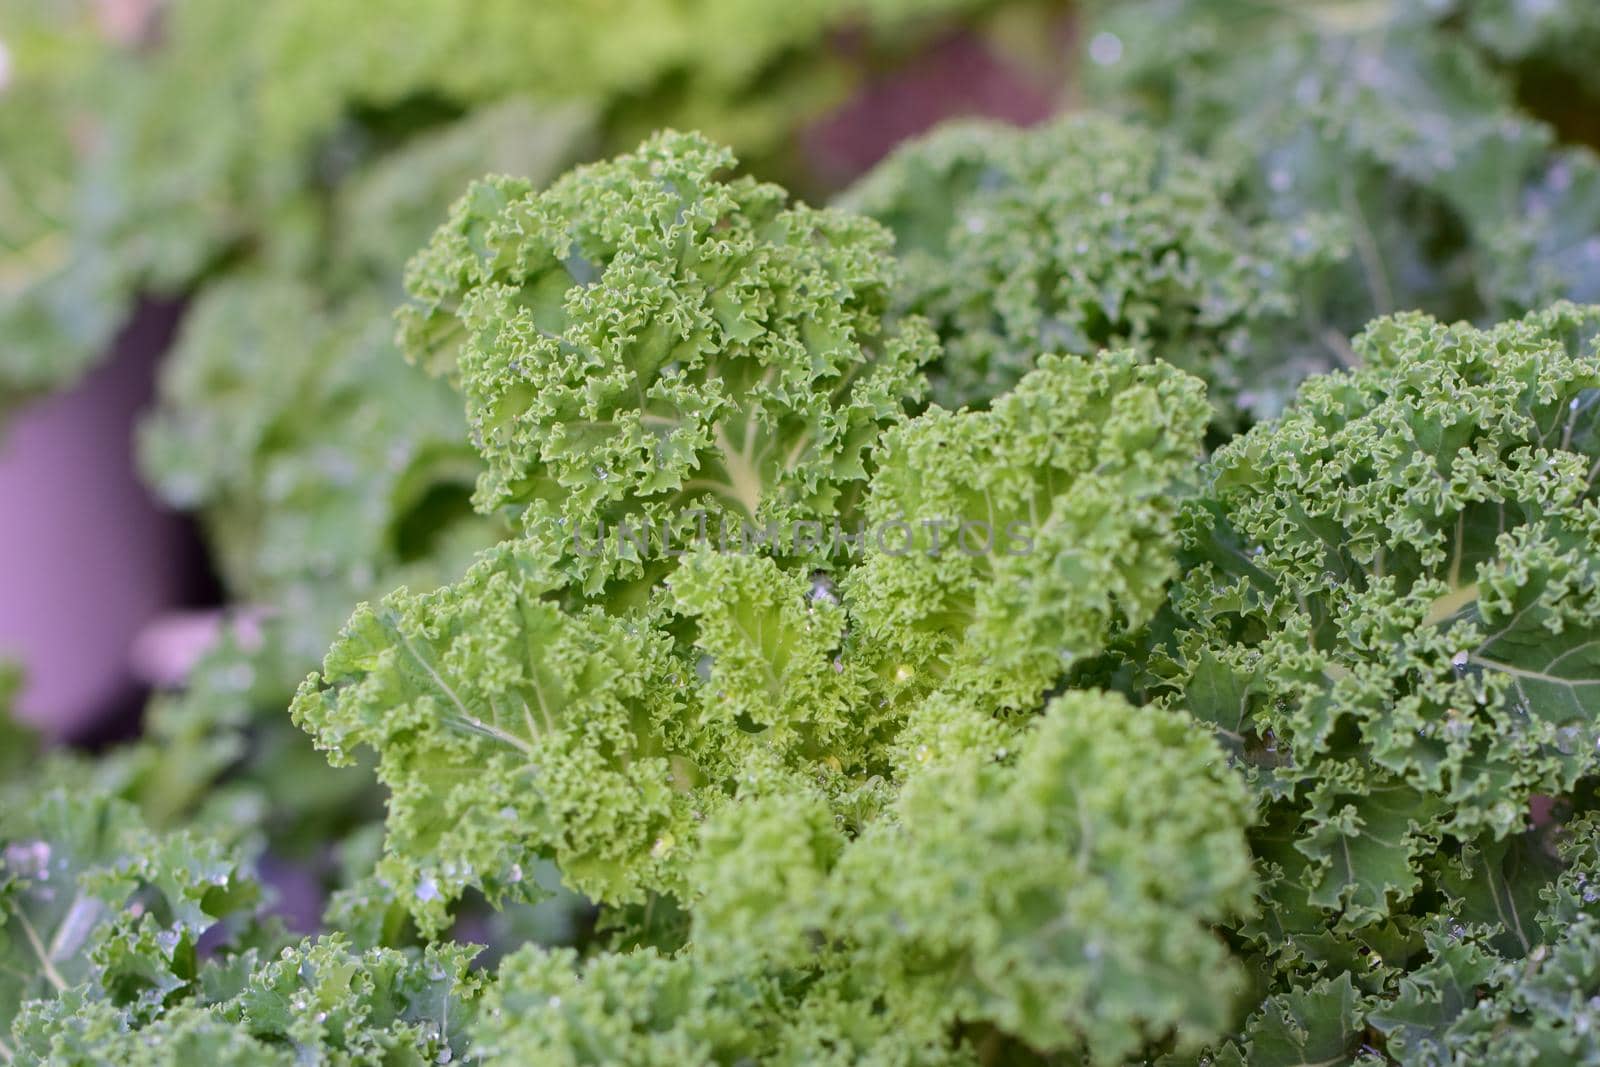 A close up of wet green kale leaves by Luise123